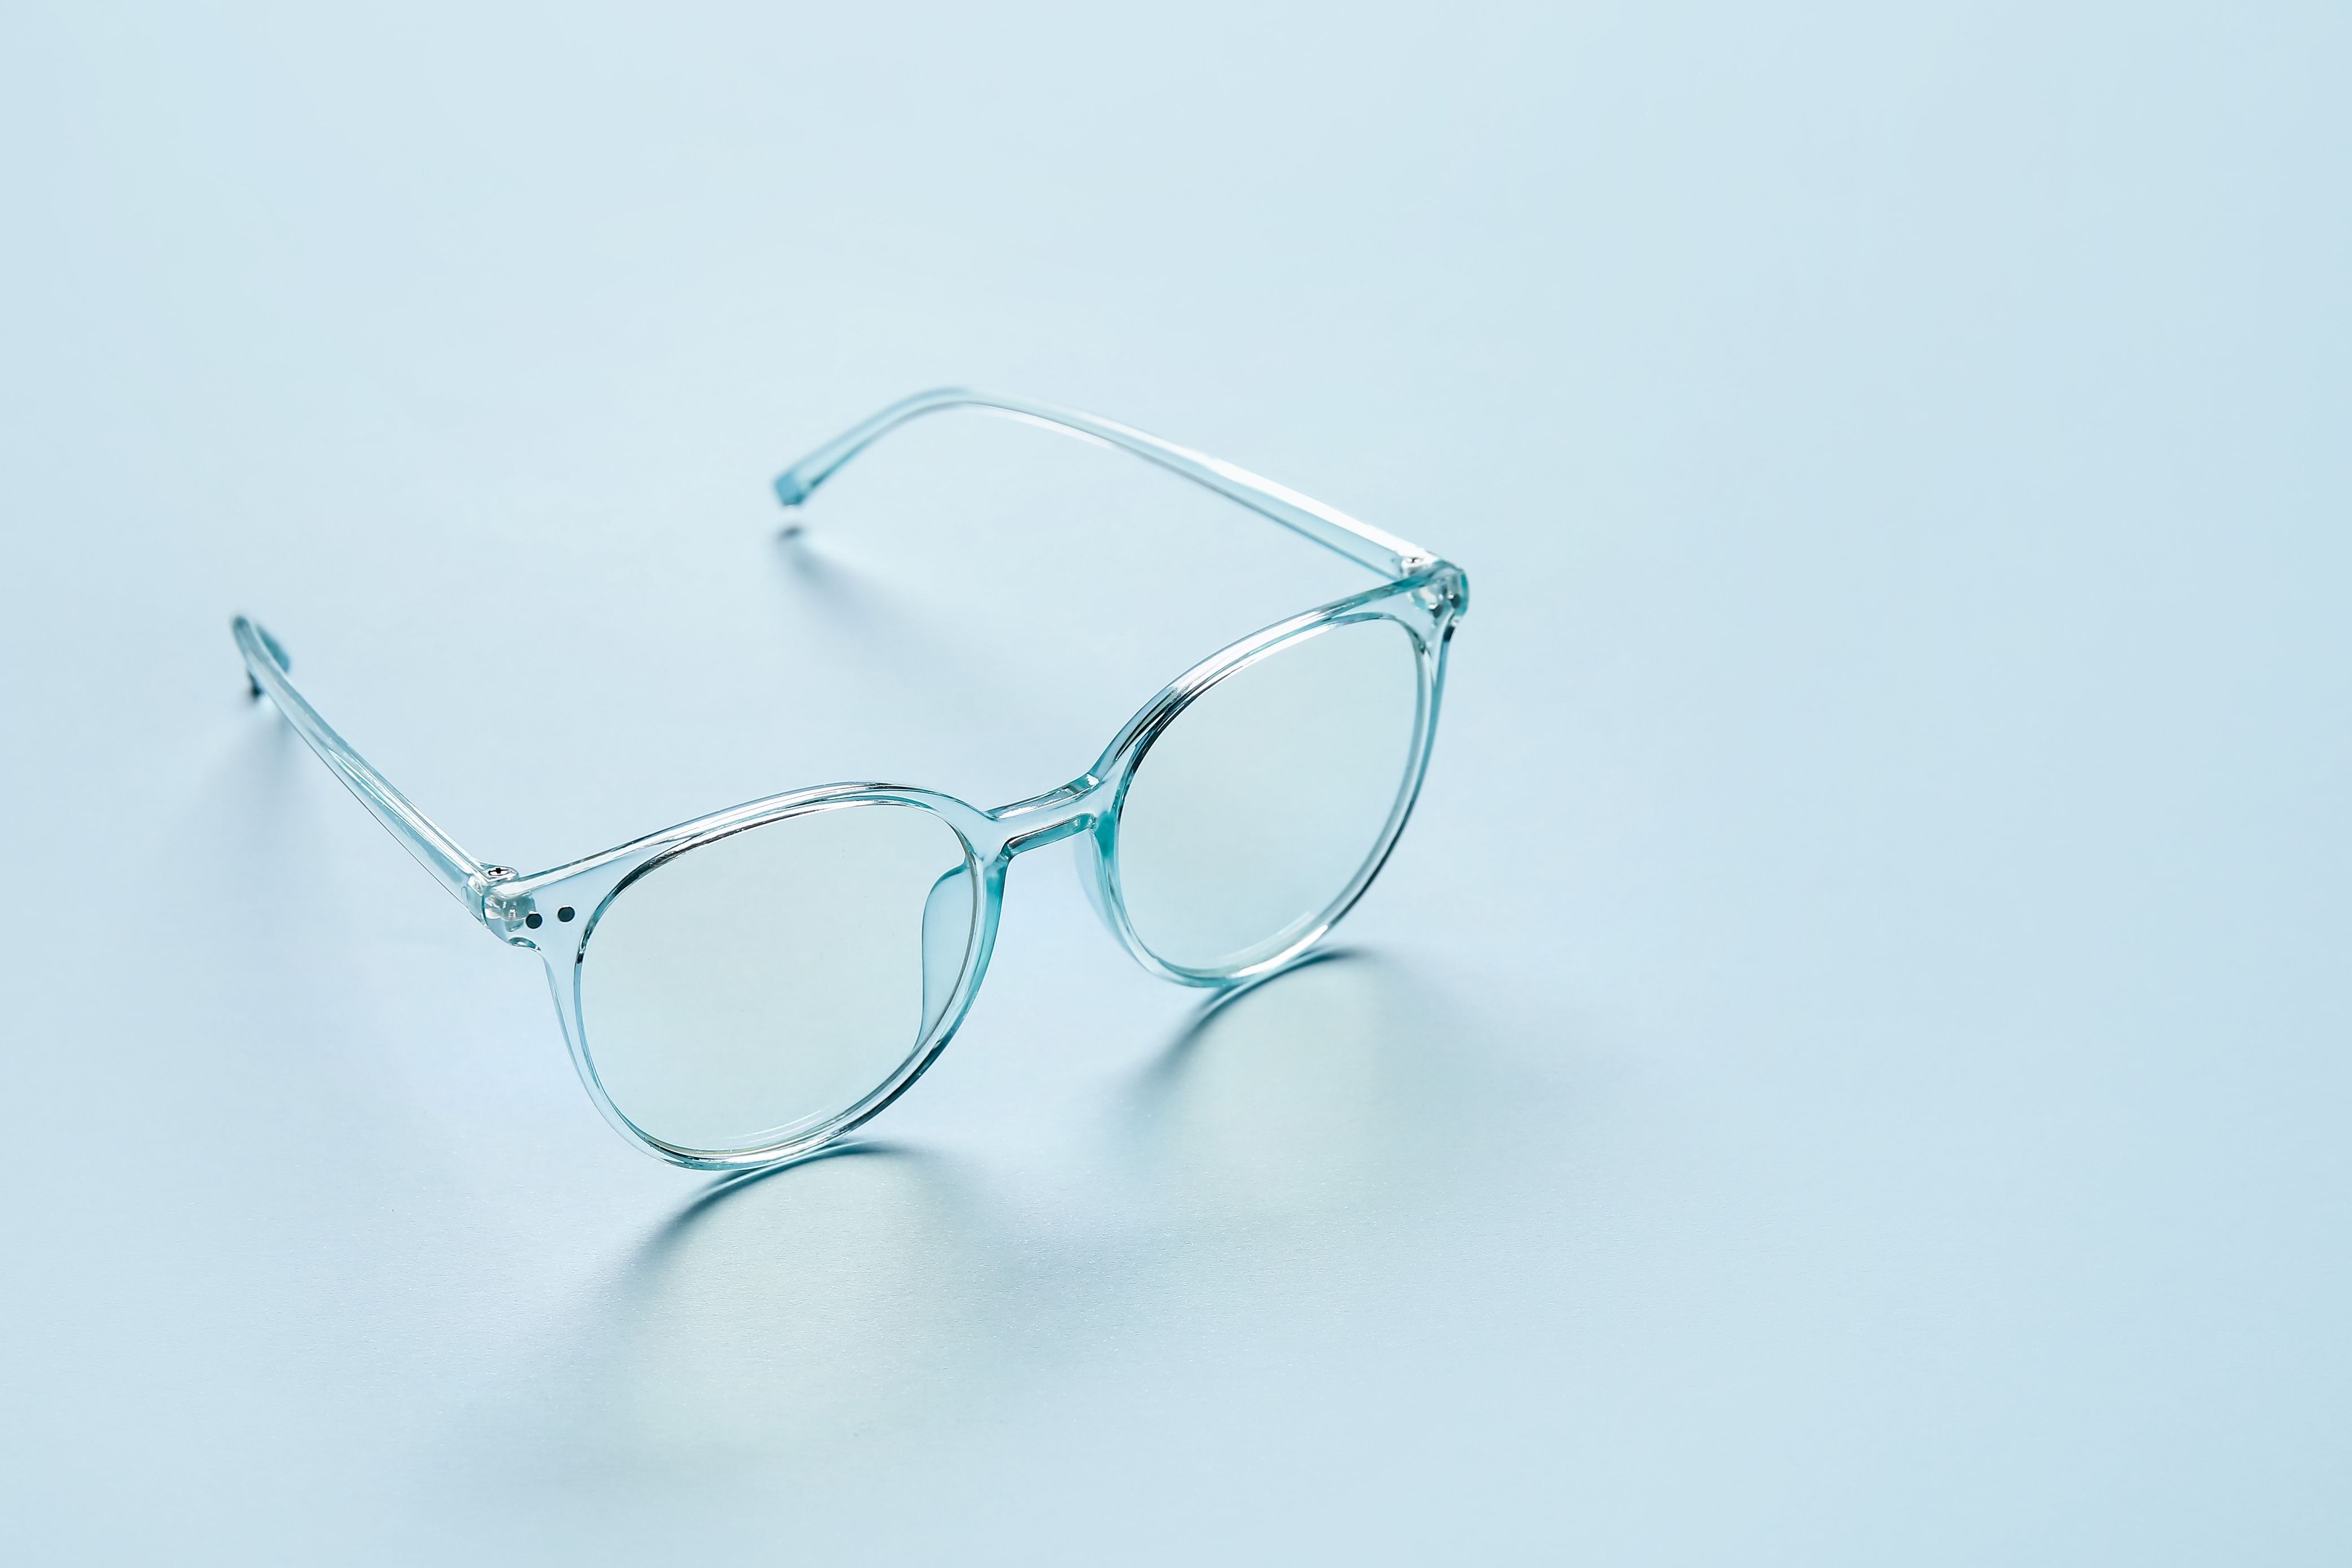 Are You Getting the Most Out of Your Blue Light Glasses?